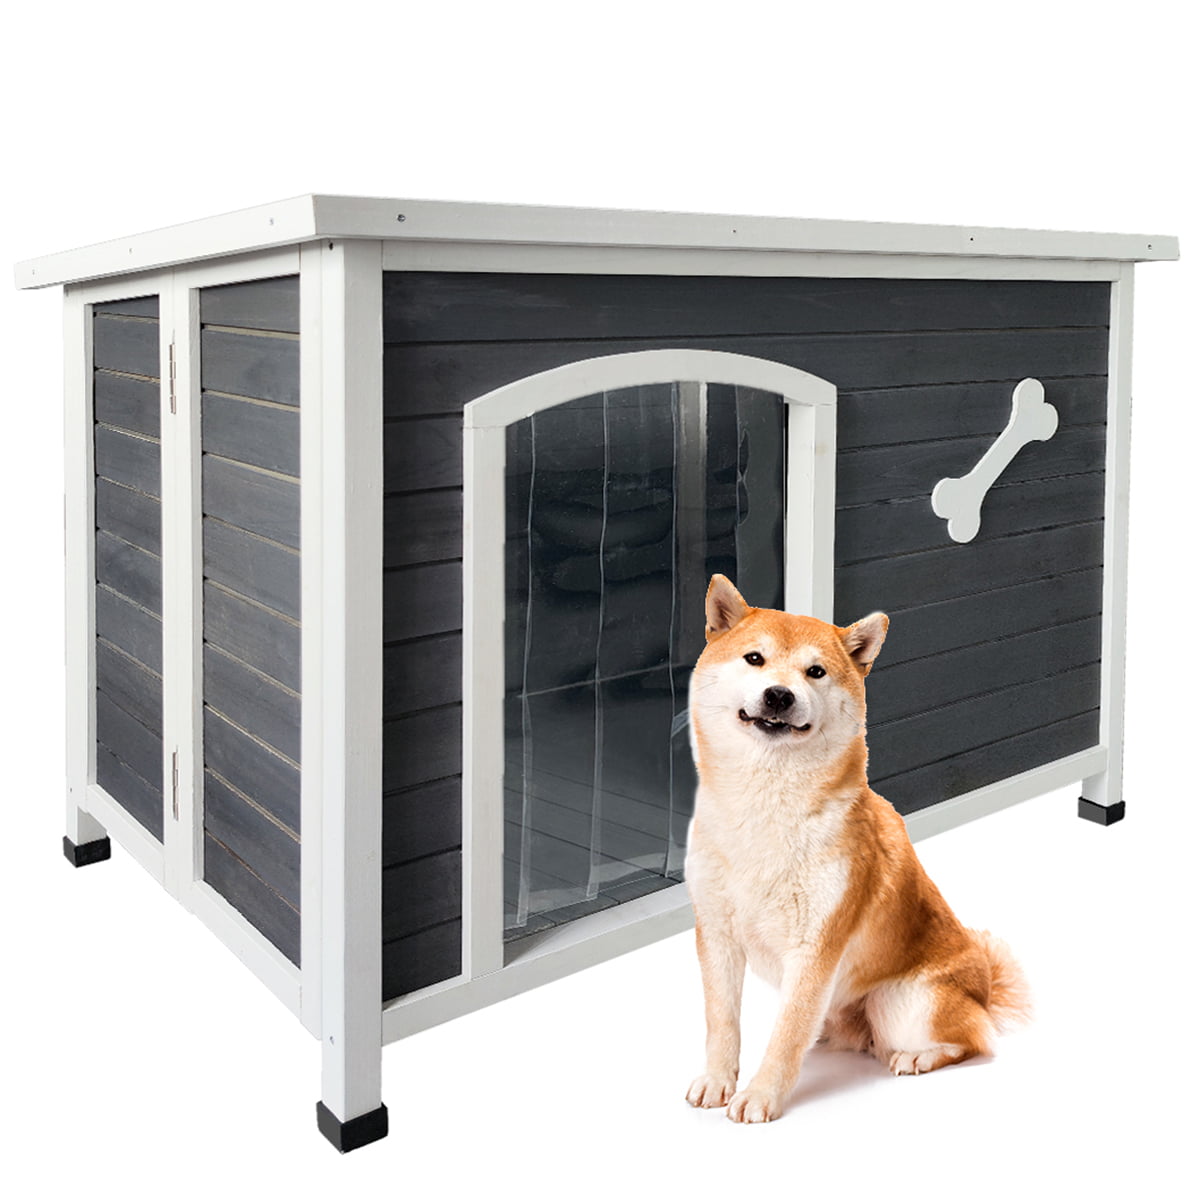 ZPL 38 Inch Wooden Dog House Outdoor Indoor Pet Kennel for Winter w/ Anti Chewing Frame and Raised Feet， Weatherproof Hut for Small Medium Large Dogs